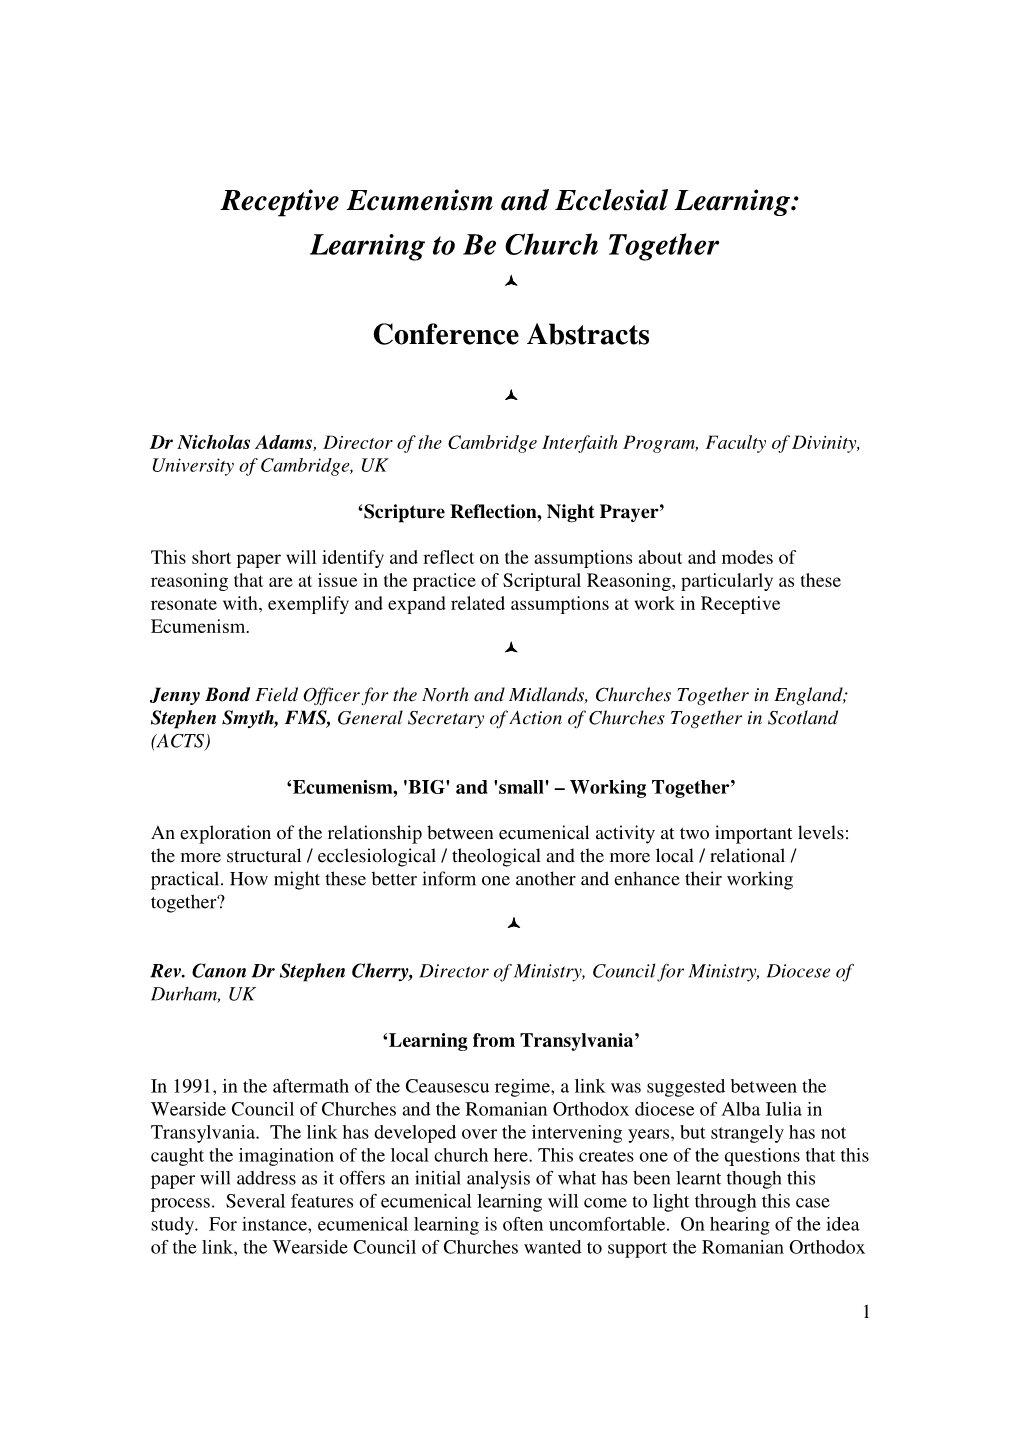 Receptive Ecumenism and Ecclesial Learning: Learning to Be Church Together Conference Abstracts